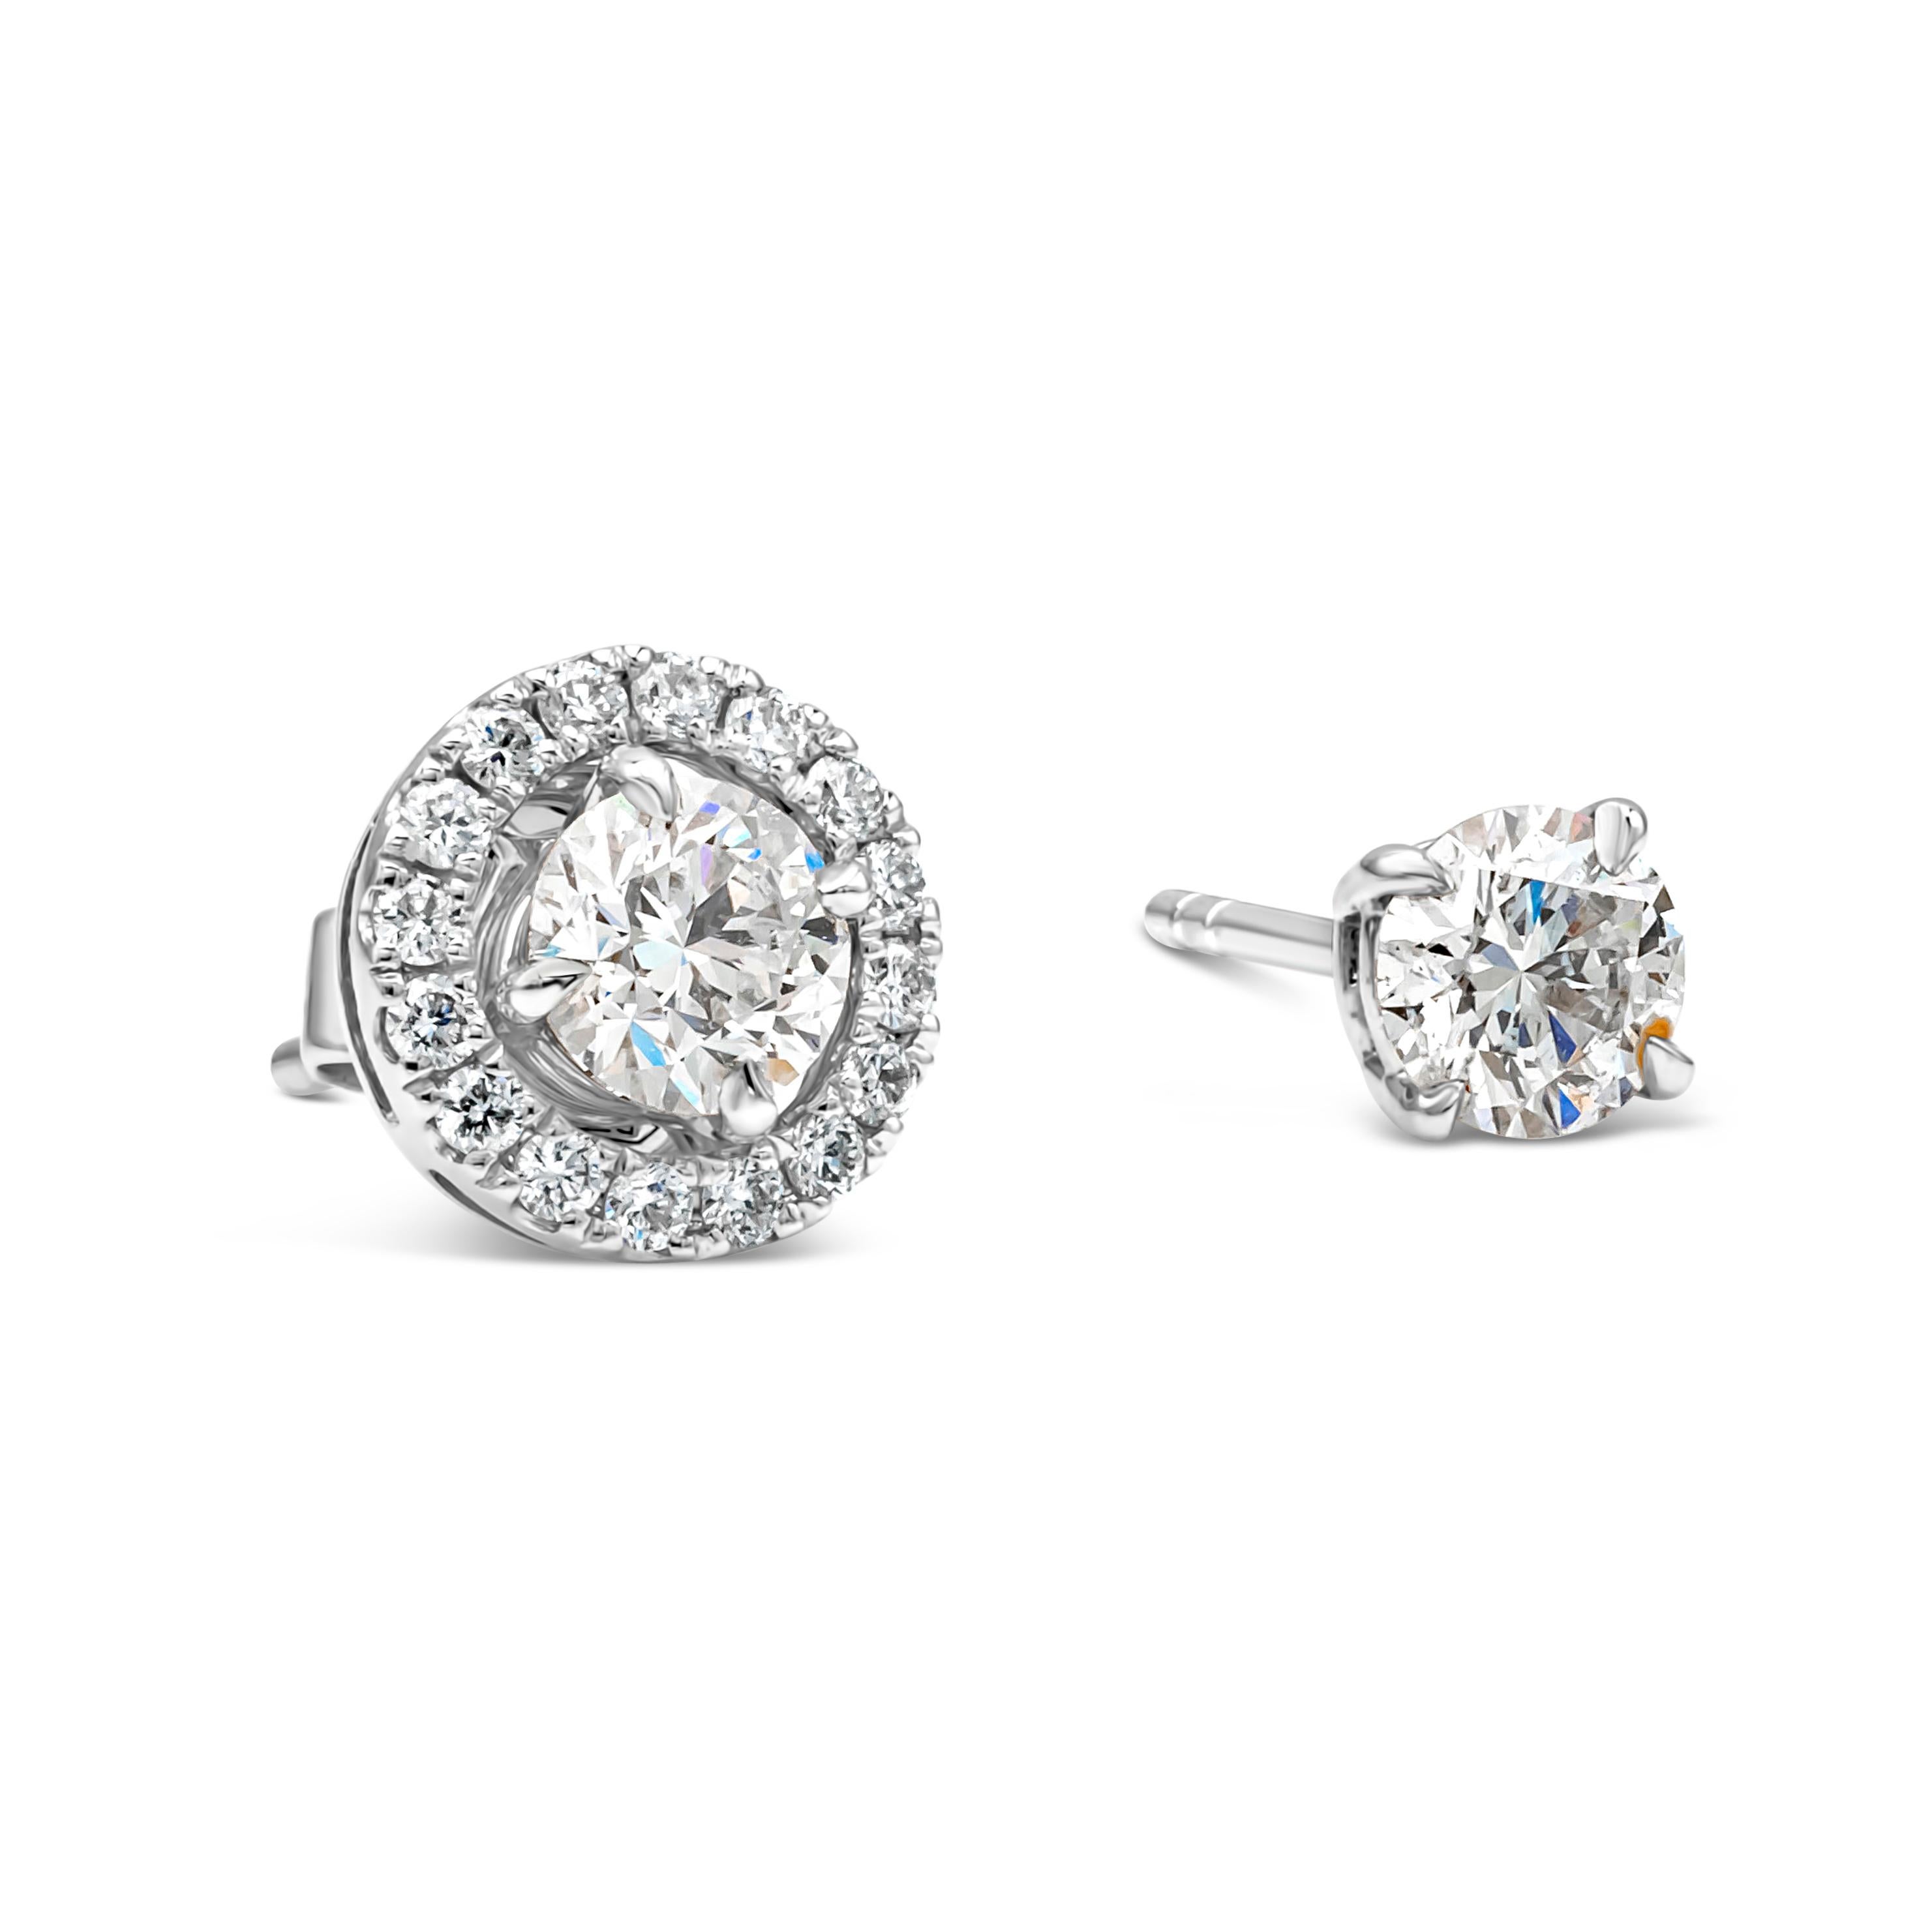 Roman Malakov 1.20 Carats Total Brilliant Round Cut Diamond Halo Stud Earrings In New Condition For Sale In New York, NY